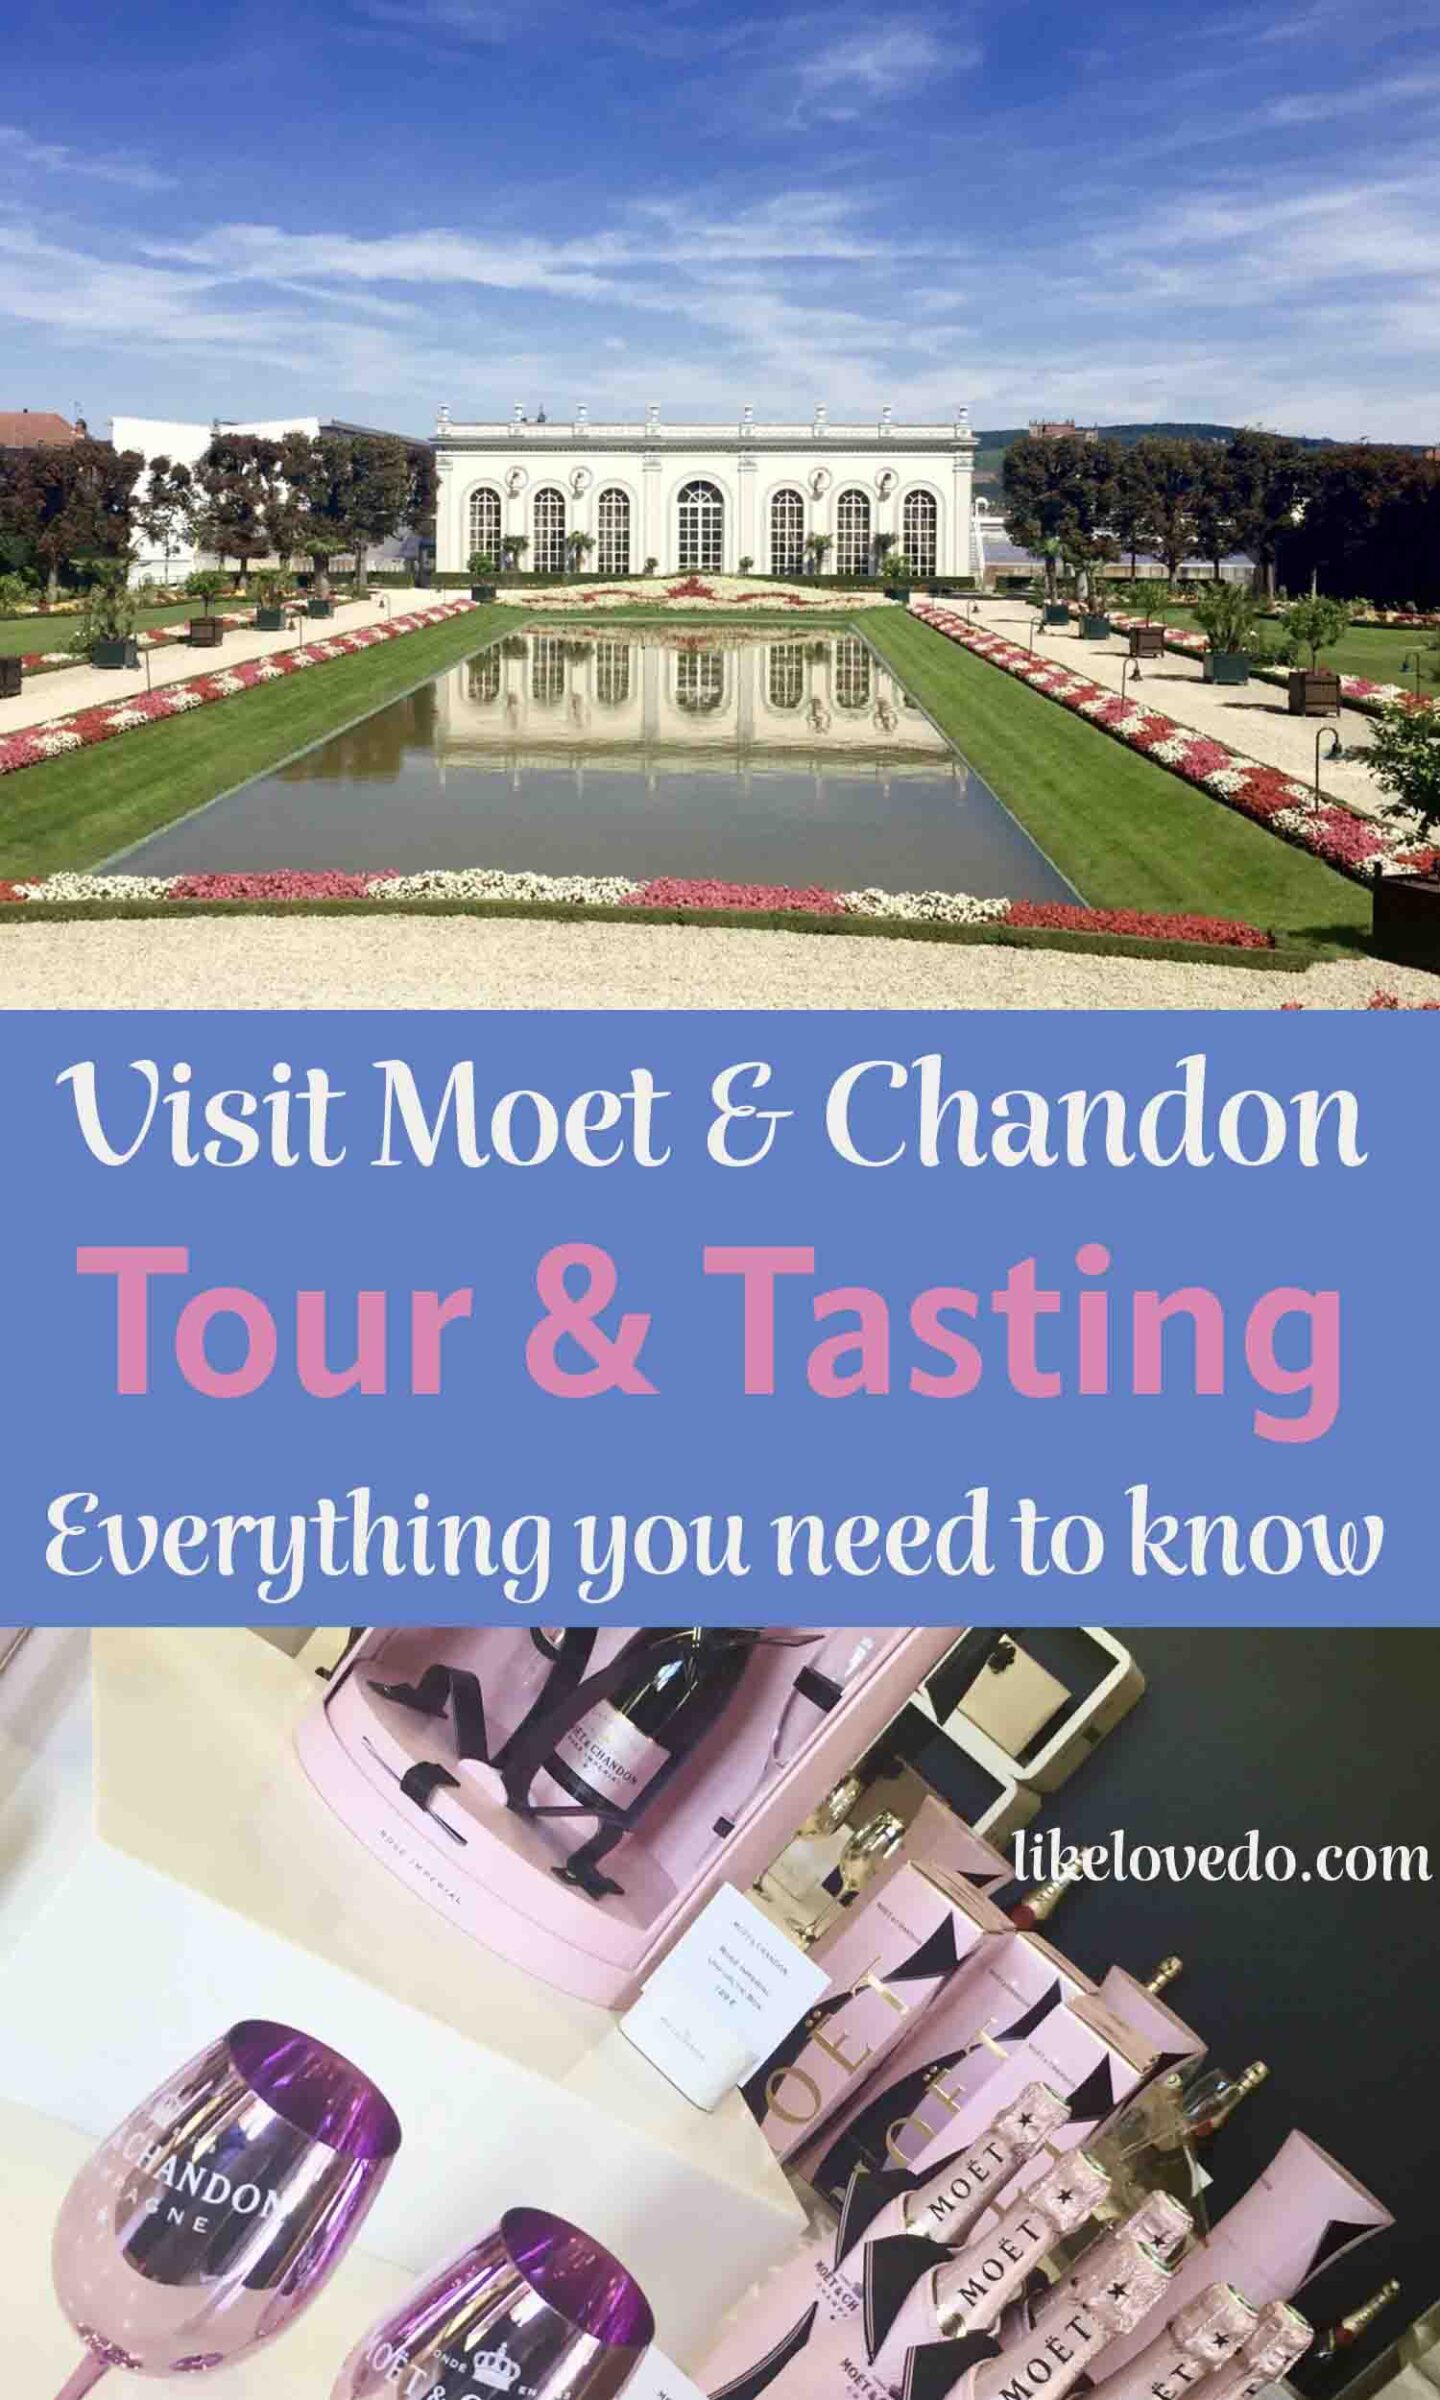 Your first stop in the champagne region must be a Moët et Chandon Epernay tasting tour! Here is how to book your Moët tour and discover the cellars and tastings of Moet in this ultimate guide